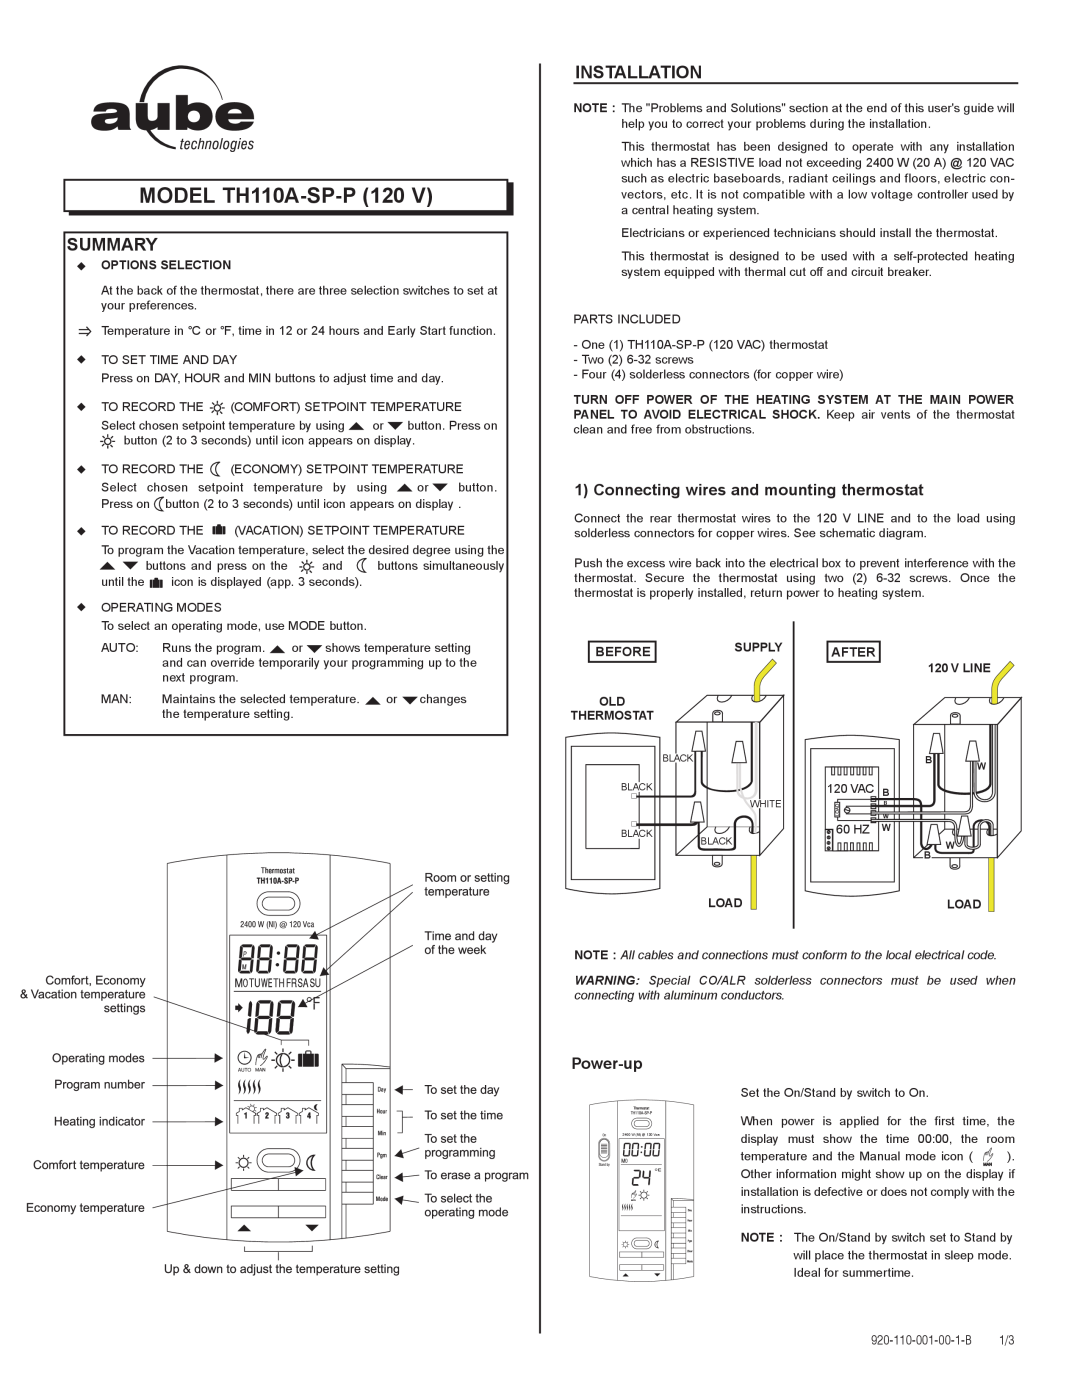 Aube Technologies manual Summary, Installation, MODEL TH110A-SP-P 120, Connecting wires and mounting thermostat, Before 